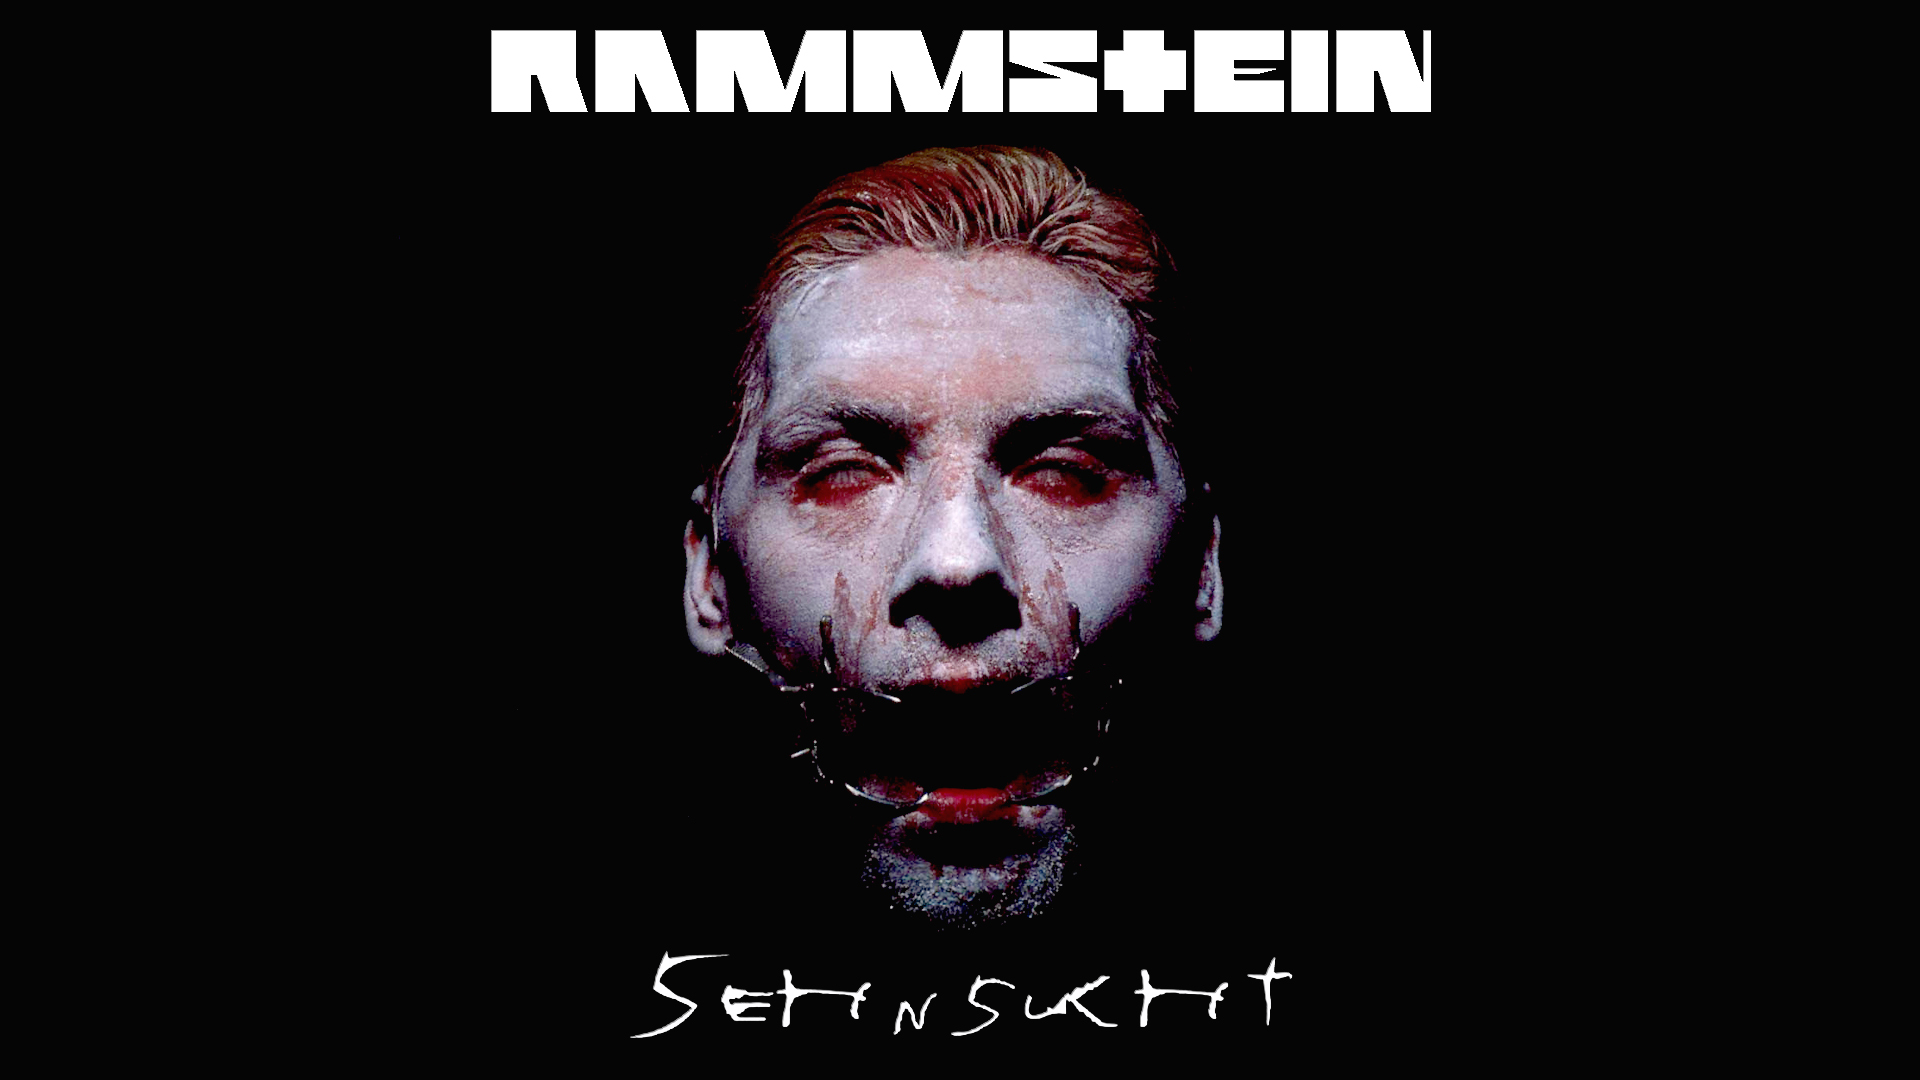 rammstein, music, germany images